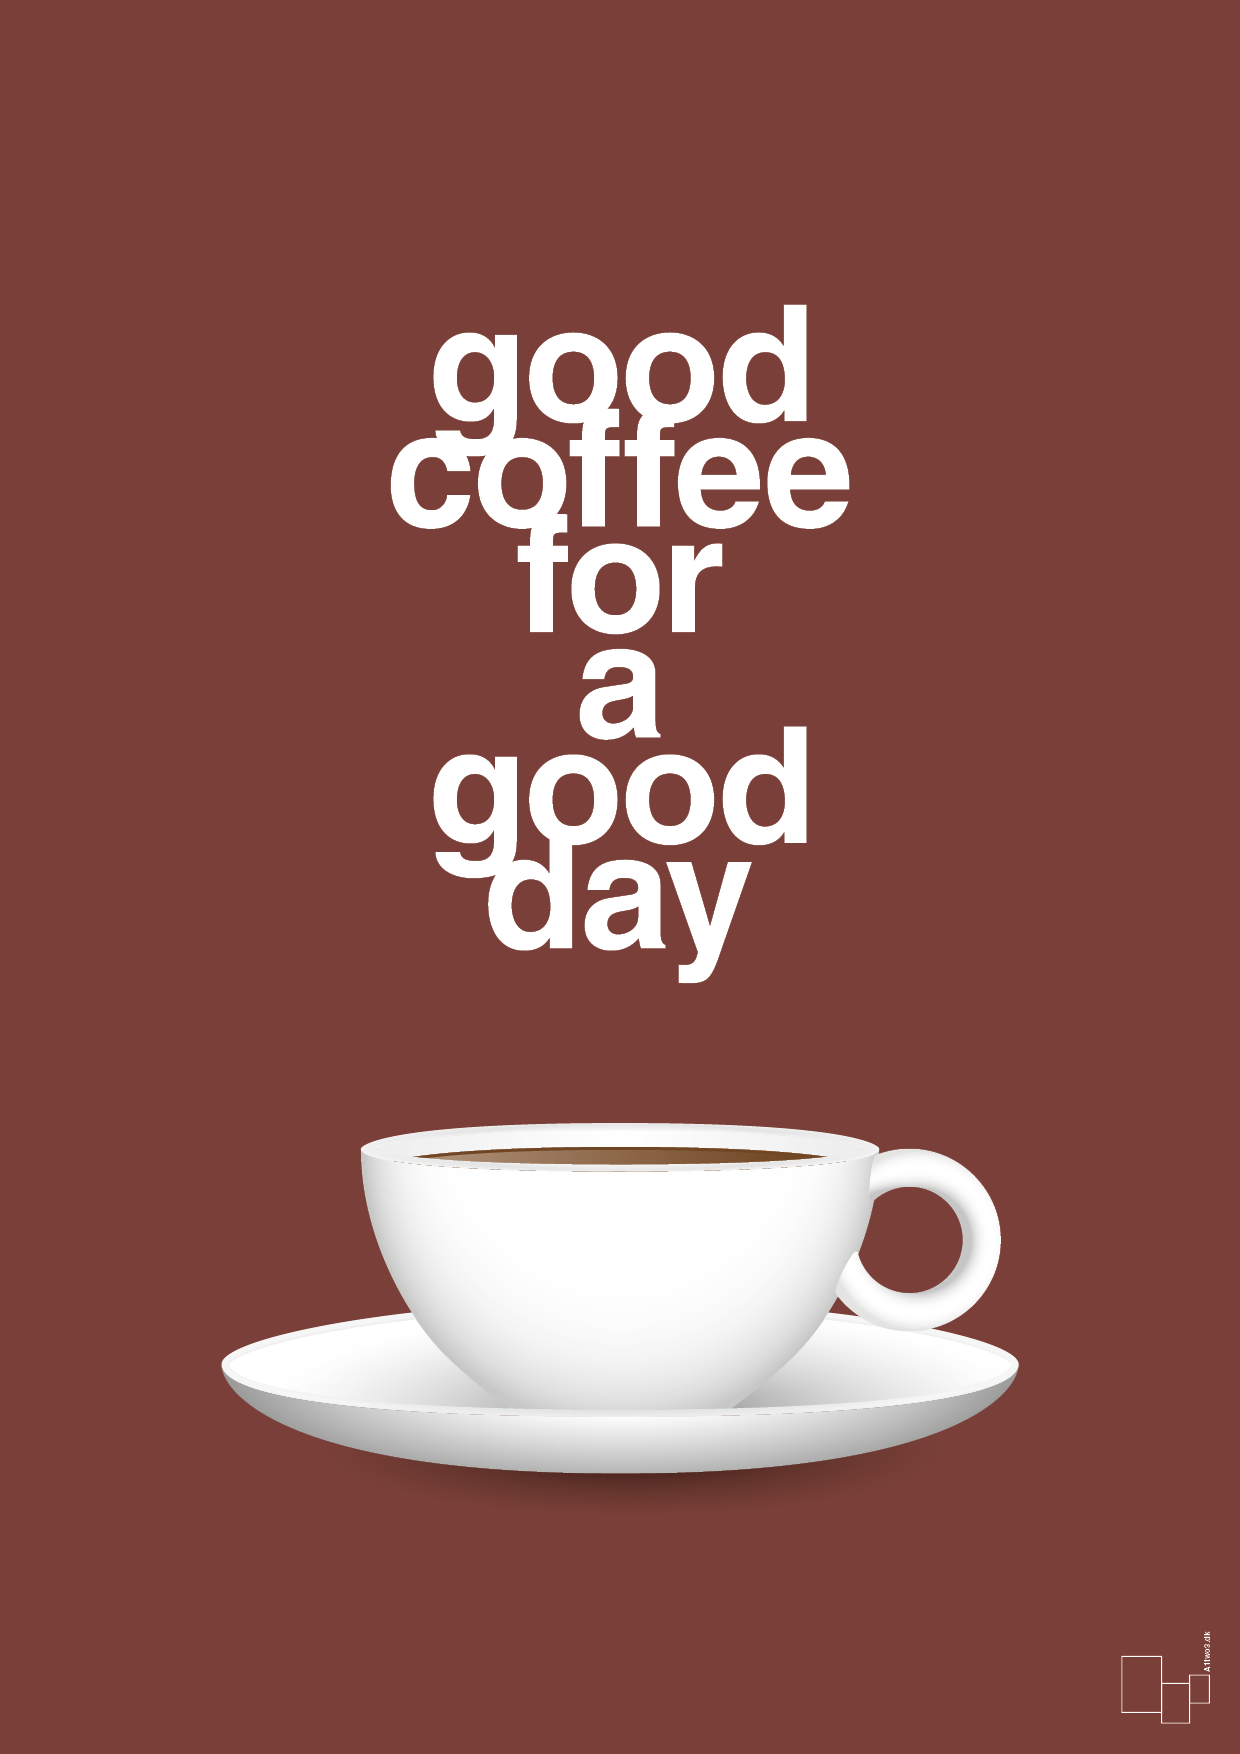 good coffee for a good day - Plakat med Mad & Drikke i Red Pepper